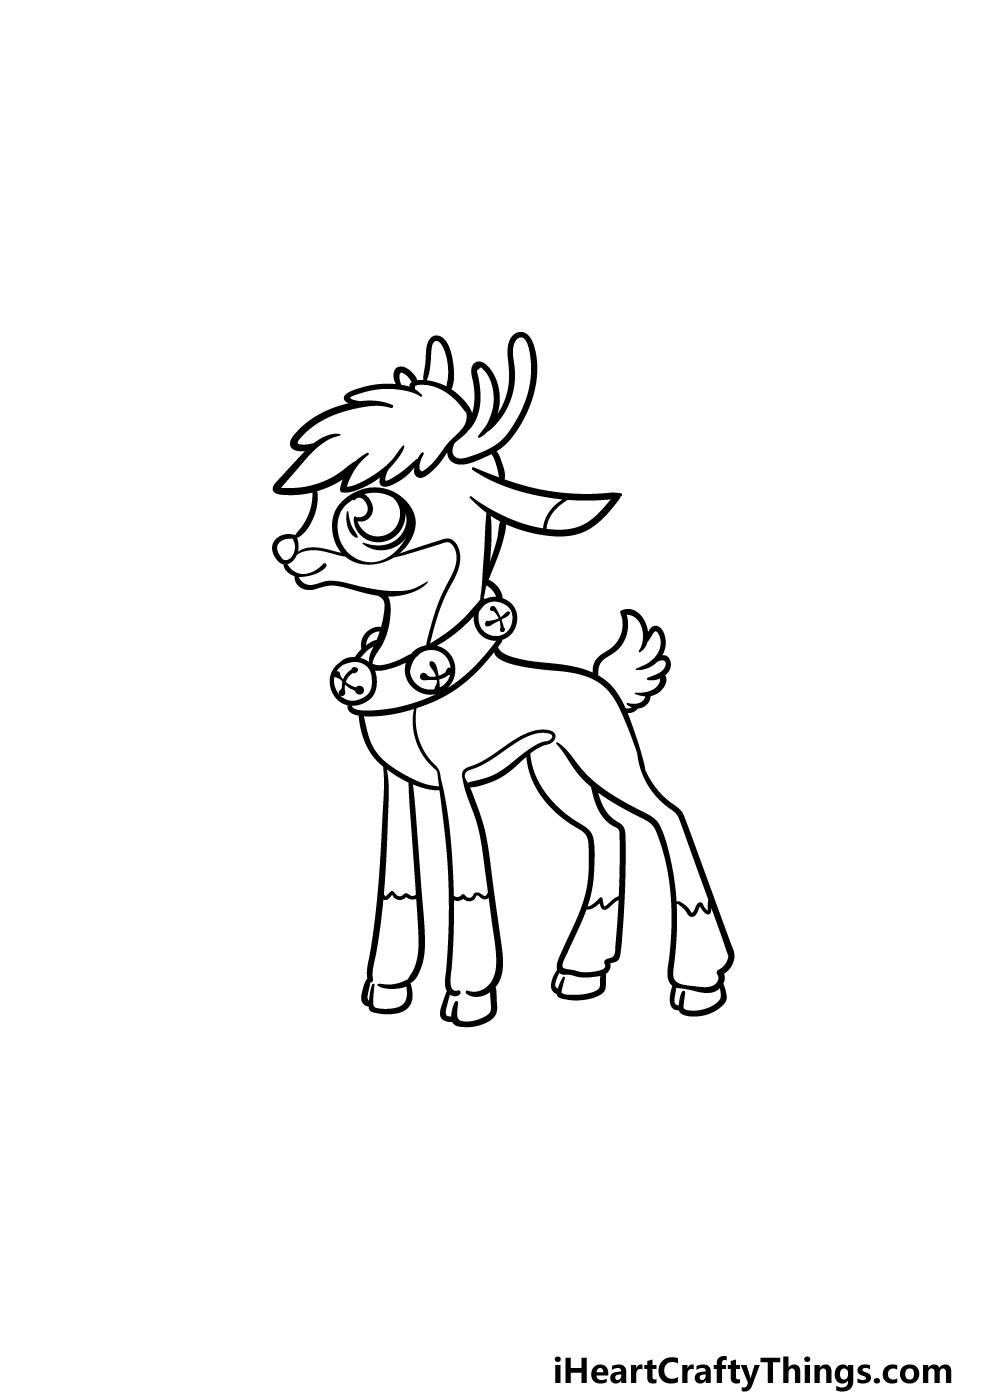 drawing Rudolph step 5